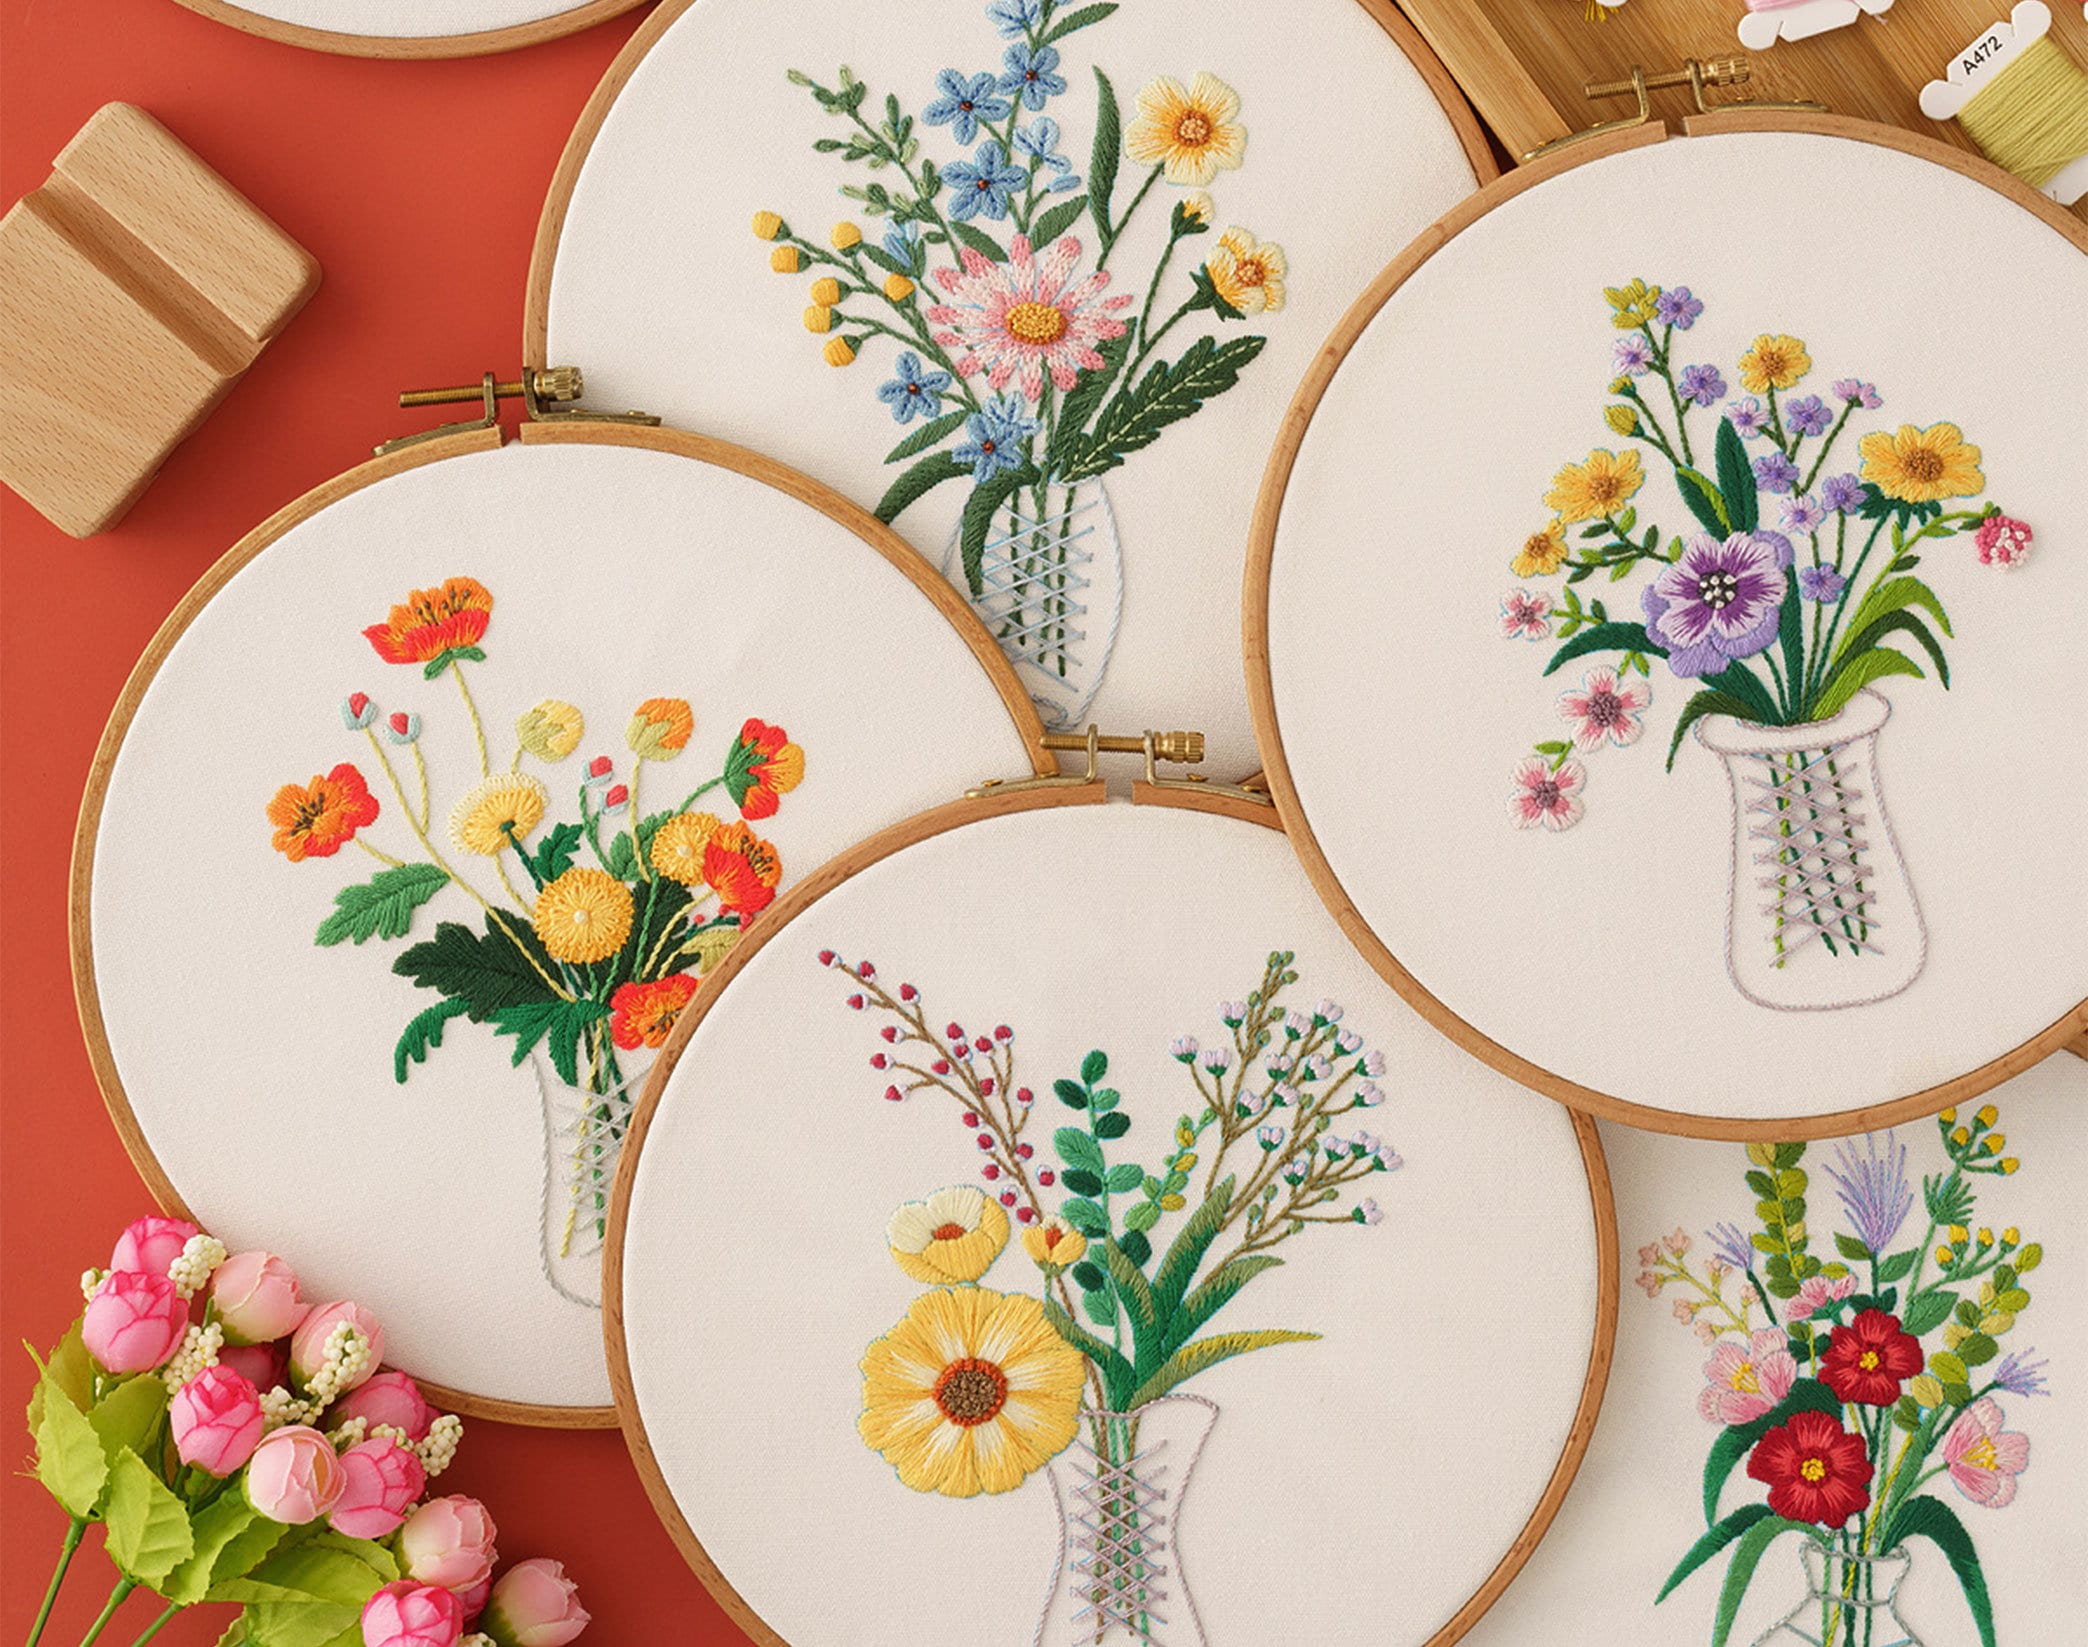 Premium Embroidery Kit for Beginners, Southern Flowers Modern Hand Embroidery  Kit, Floral Embroidery Kit, DIY Craft Kit 